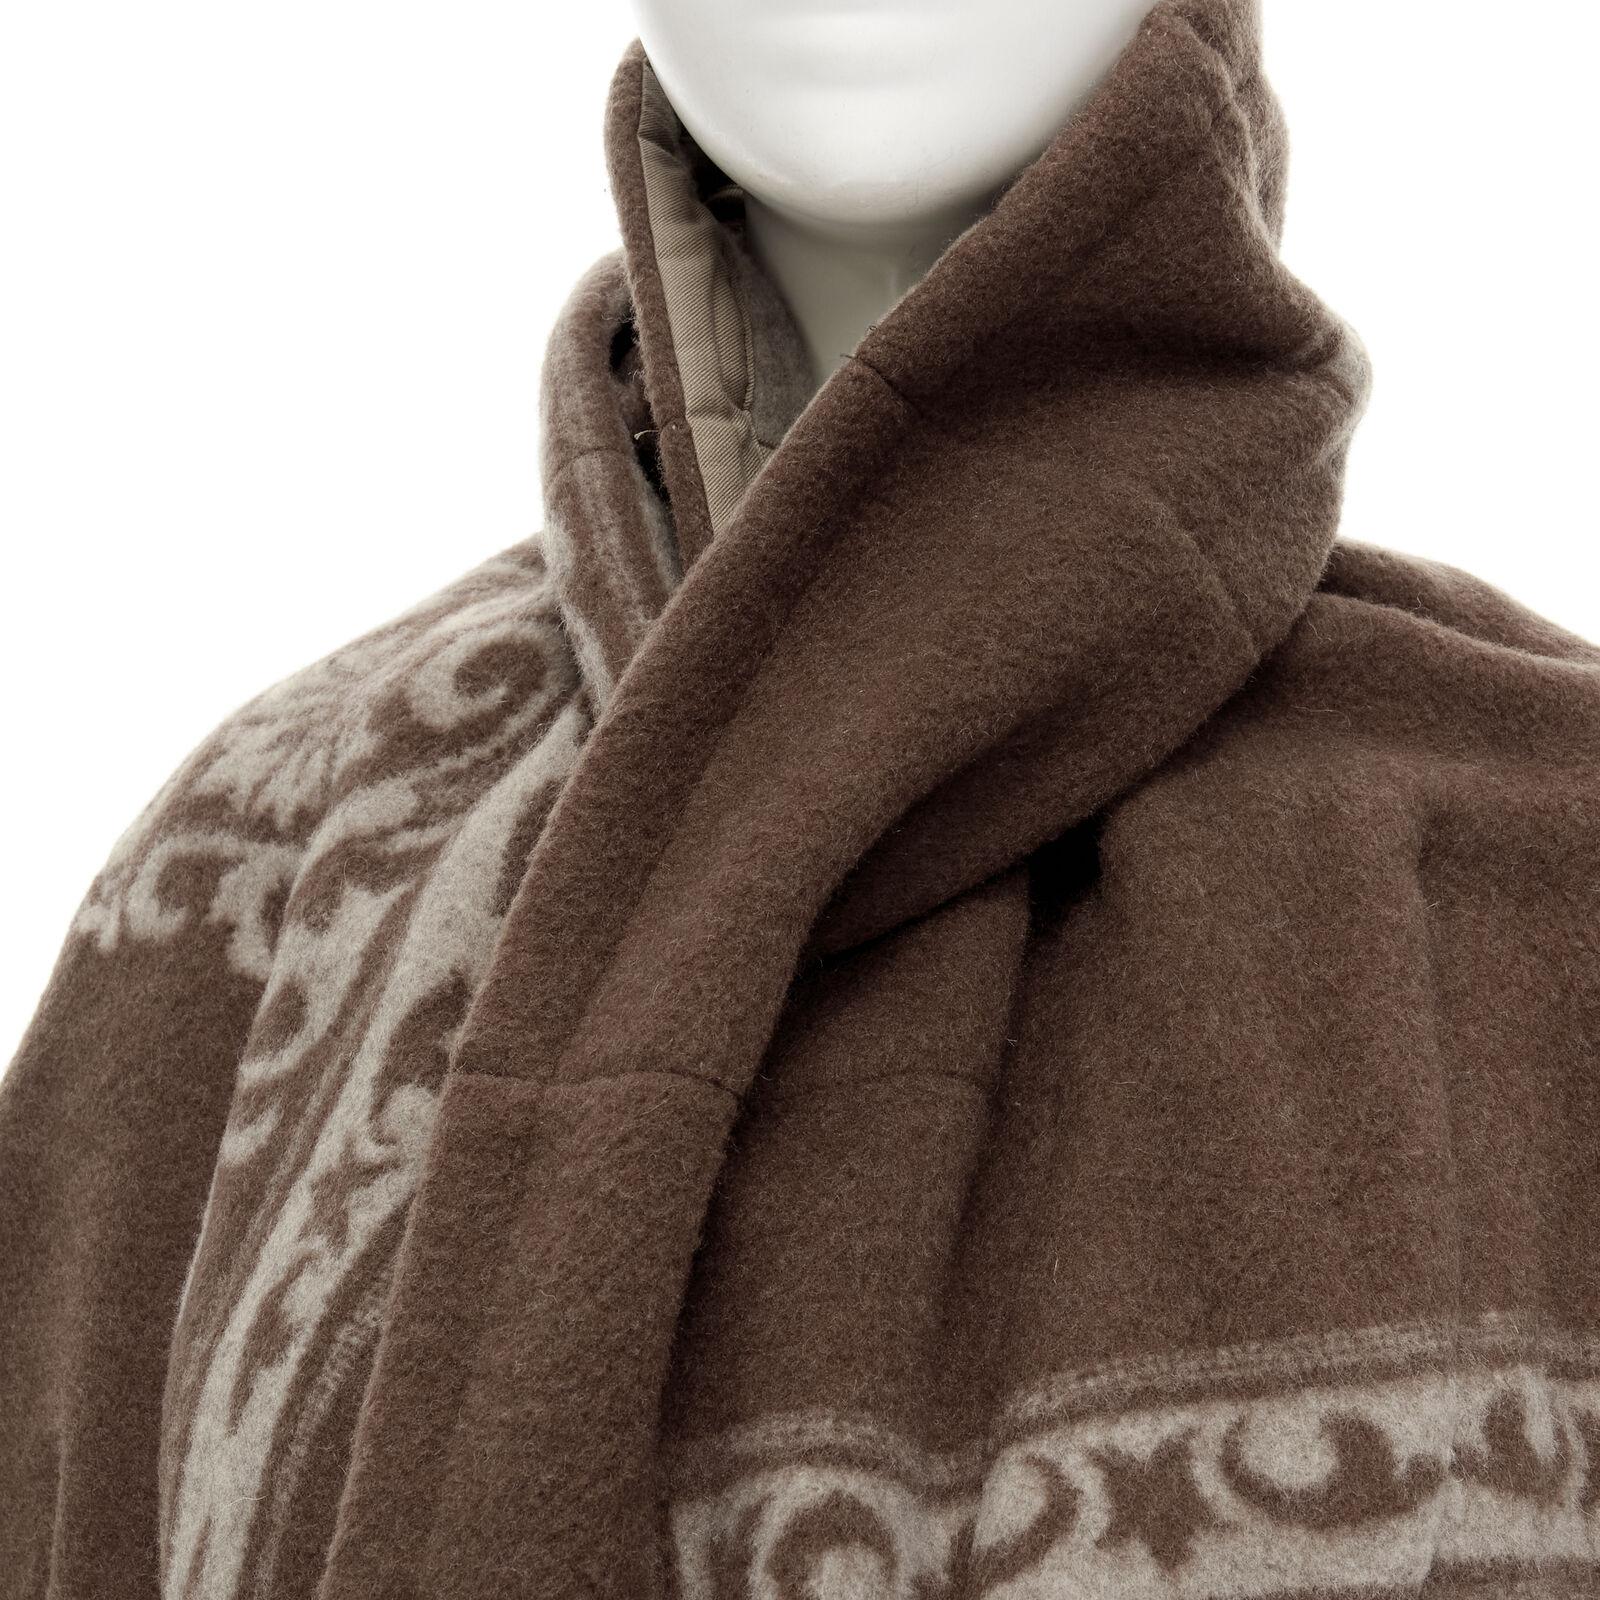 rare COMME DES GARCONS 2009 Runway brown ethnic wool cashmere blanket cocoon M
Reference: CRTI/A00686
Brand: Comme Des Garcons
Designer: Rei Kawakubo
Collection: 2009 - Runway
Material: Wool, Cashmere
Color: Brown, Navy
Pattern: Aztec
Closure: